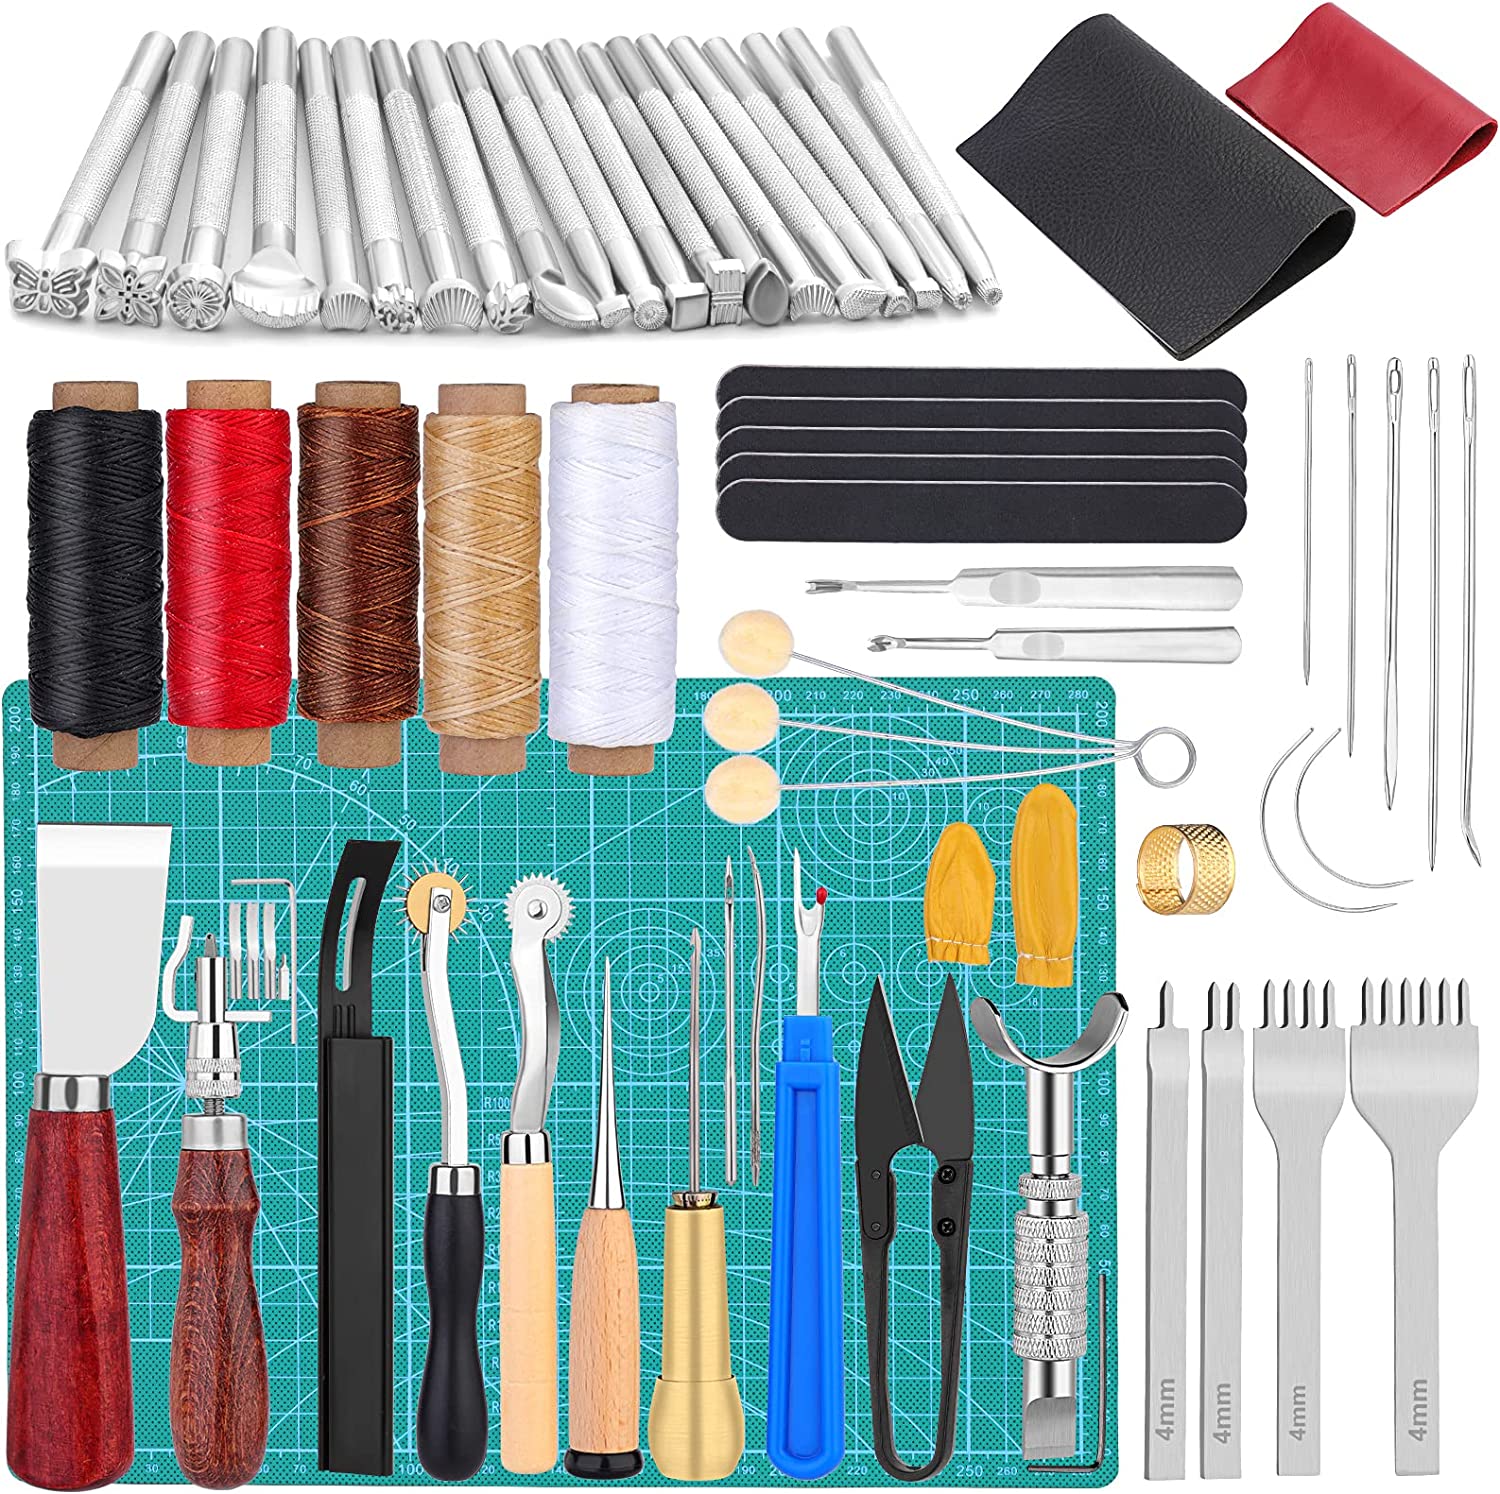 BUTUZE Practical Leather Tools 60 Pcs Complete Craft Sewing Kit for Beginner/Professional- Leather Crafting Kit for Bookbinding, Sewing, Leather